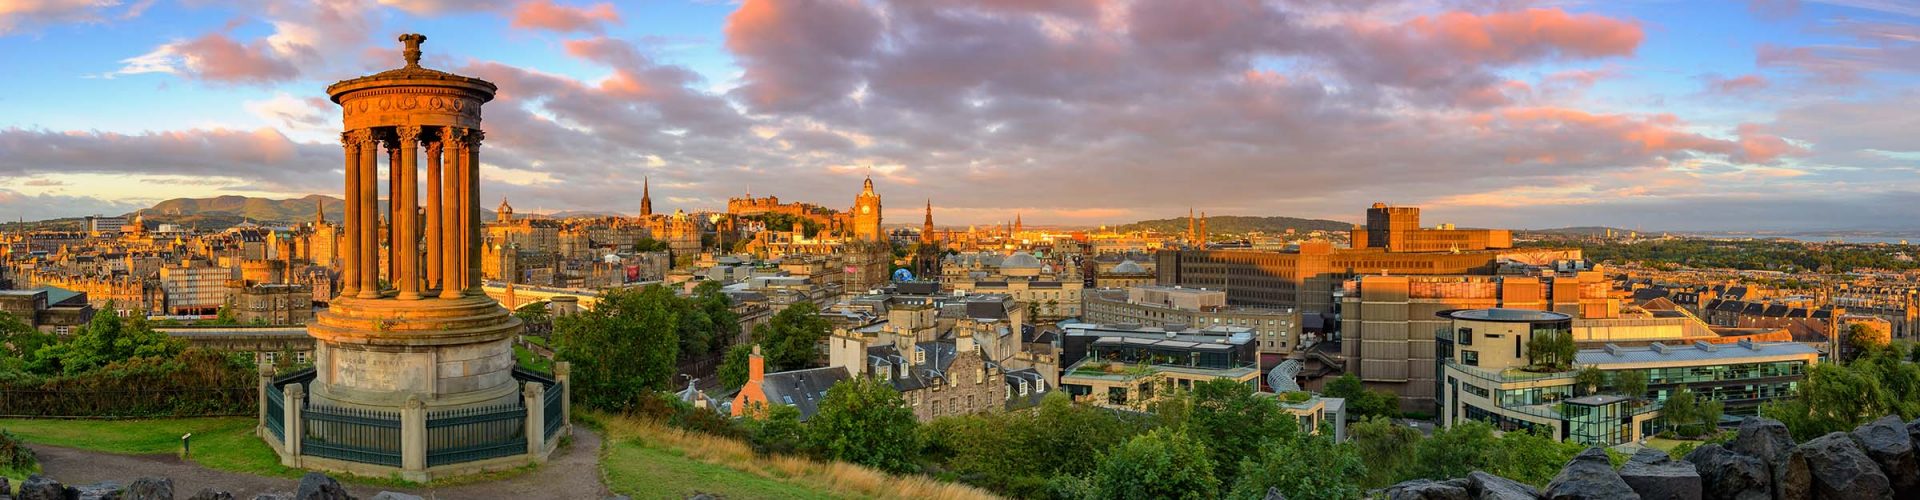 A panoramic view of the city of Edinburgh from Calton Hill